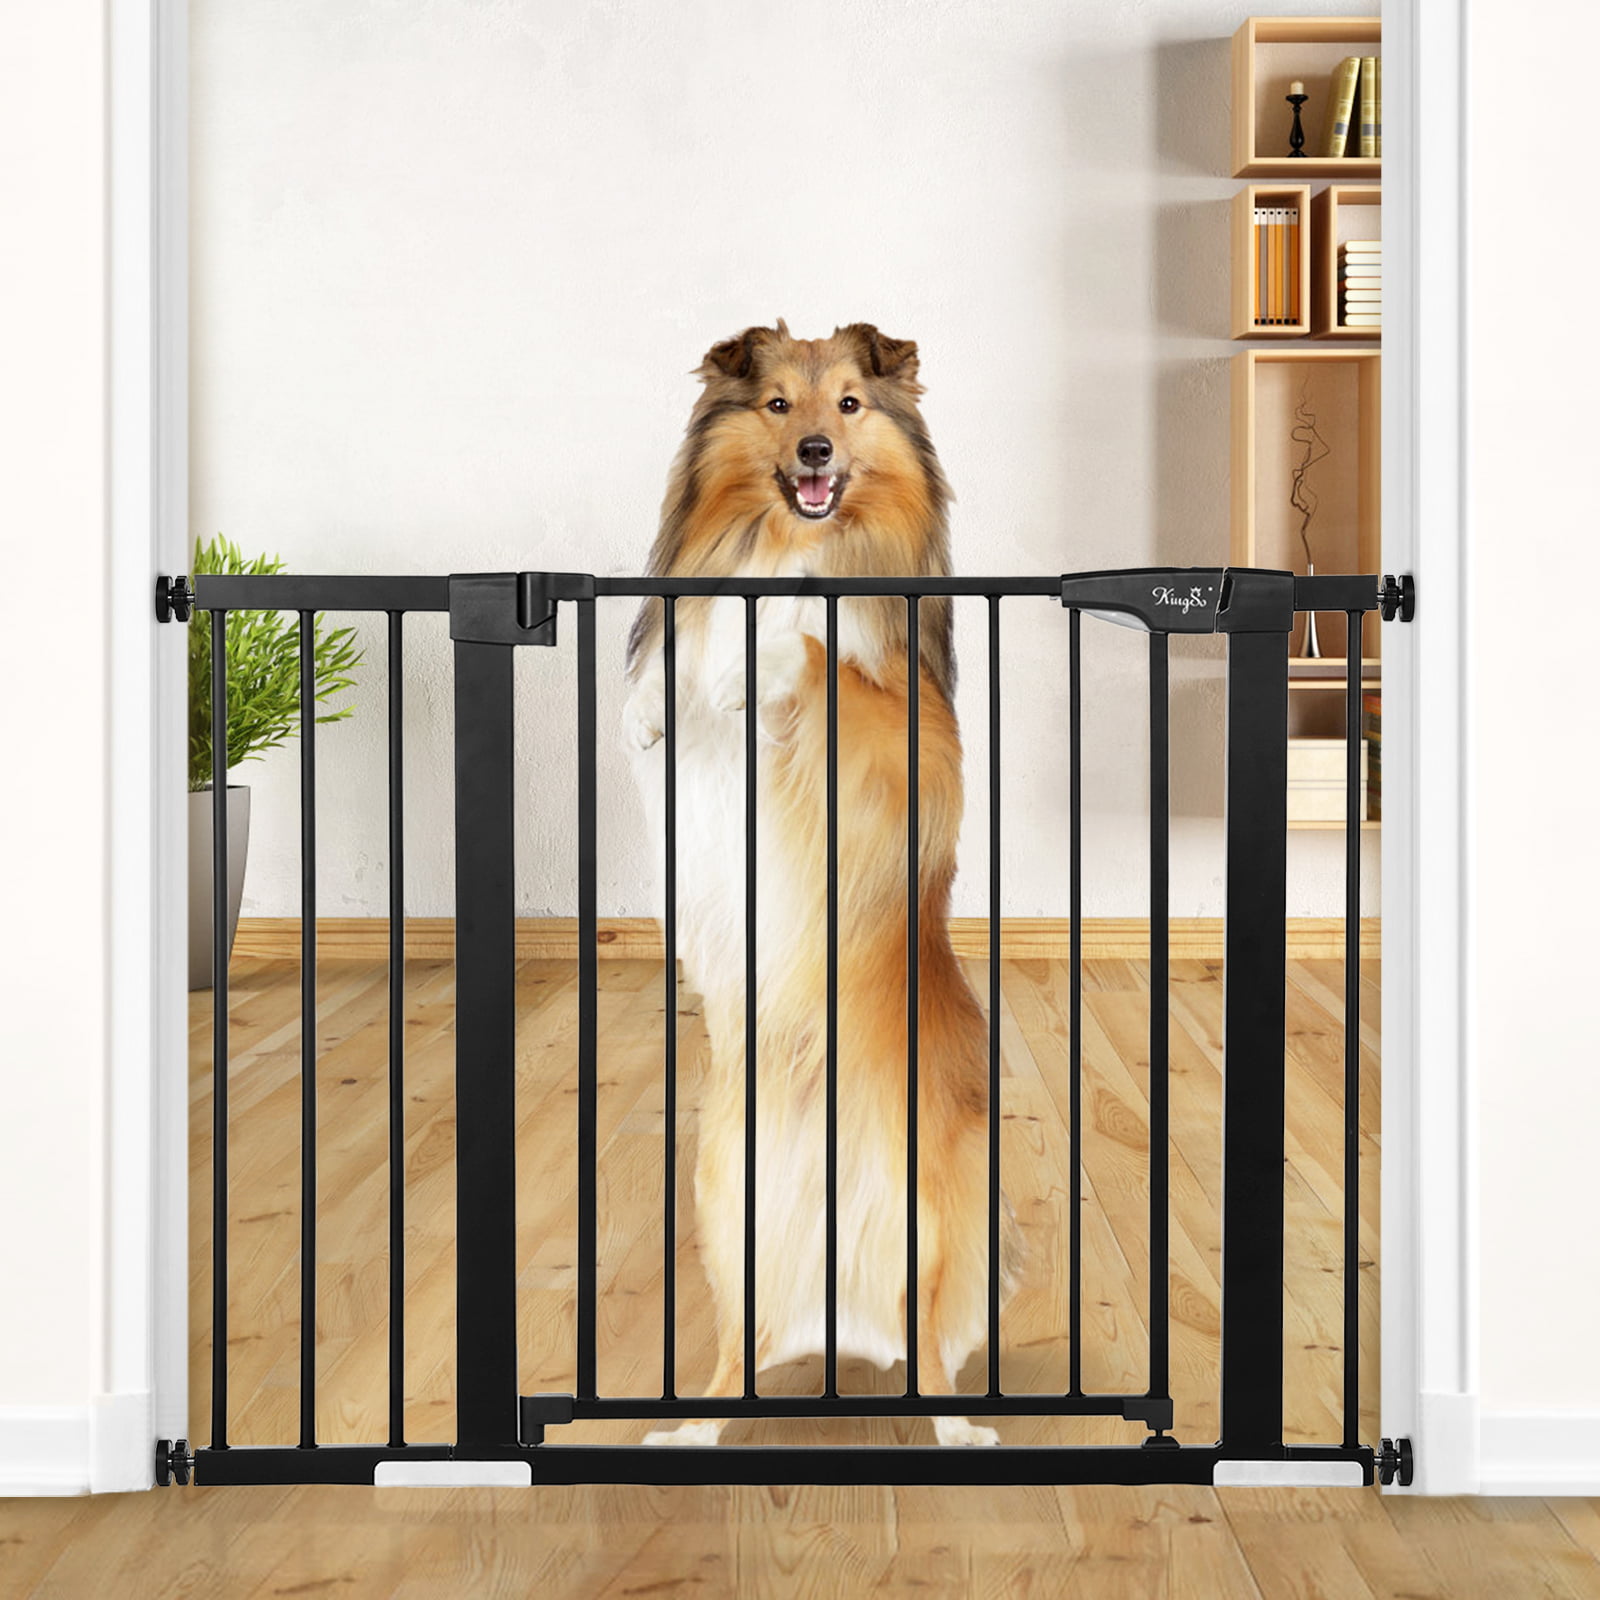 Baby Wood Metal Safety Gate In Door Pet Dog Extendable Child Protection Barrier 